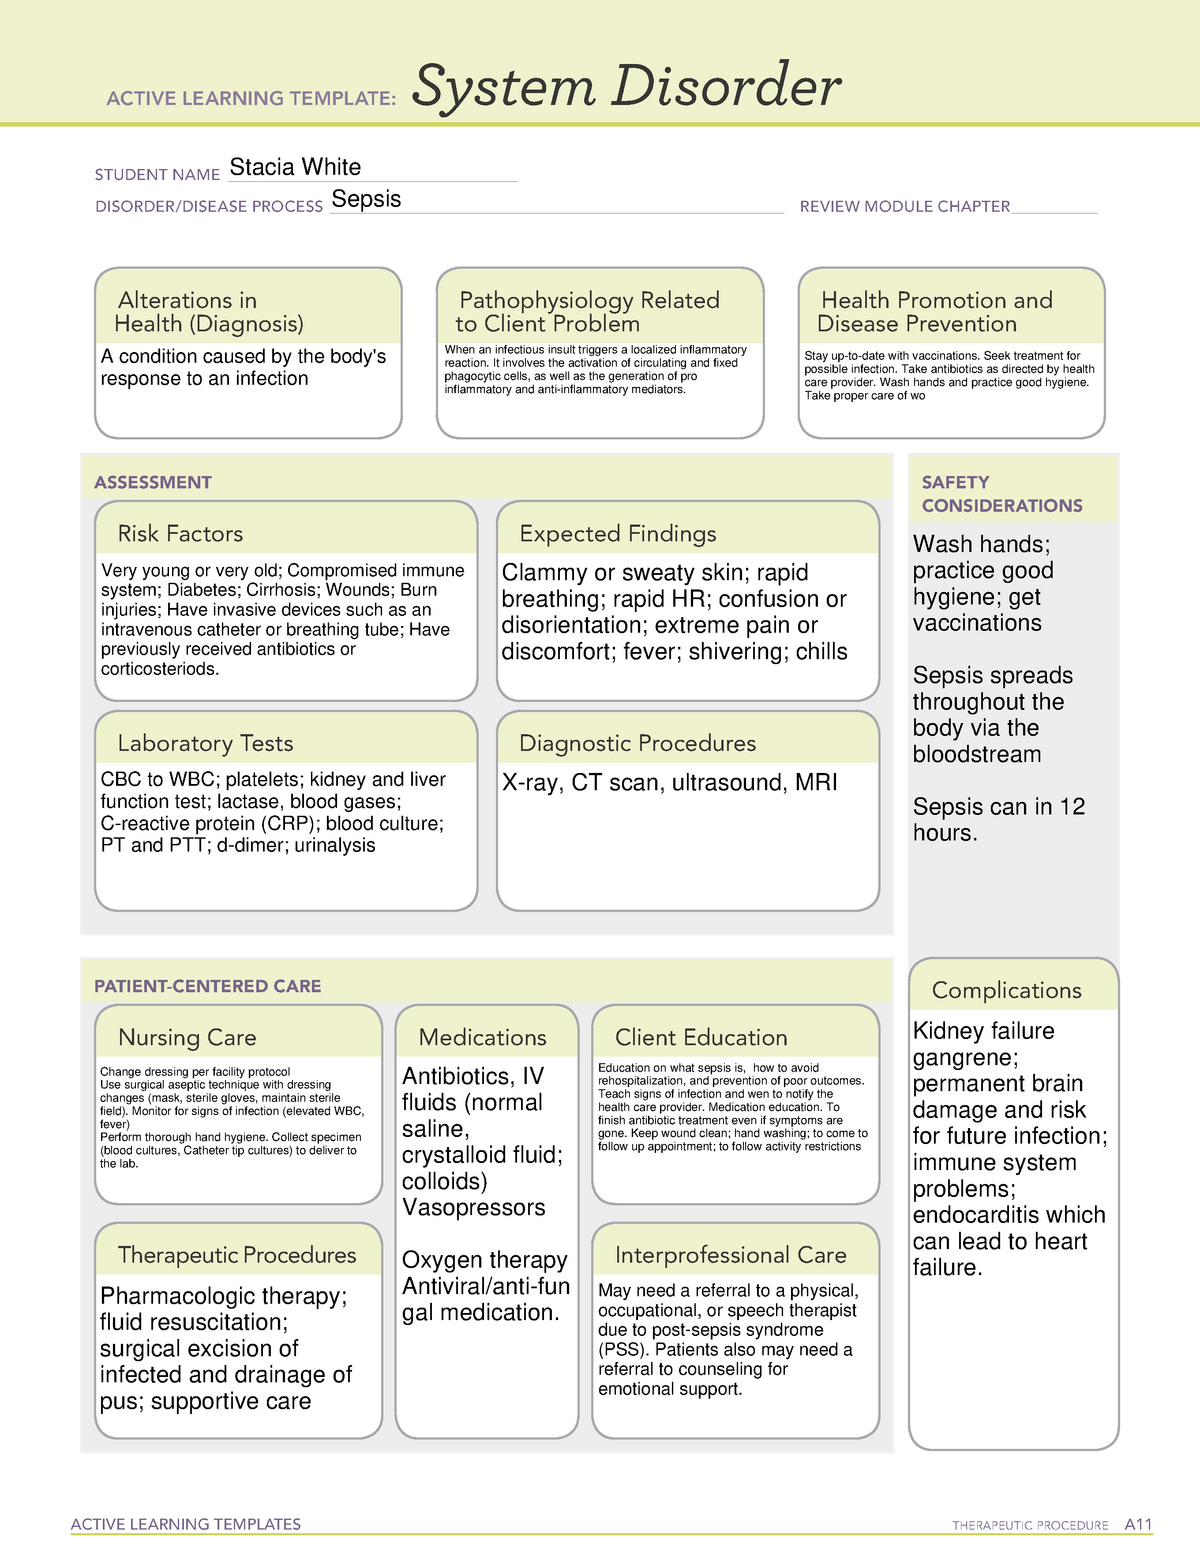 System Disorder Sepsis Template ATI ACTIVE LEARNING TEMPLATES